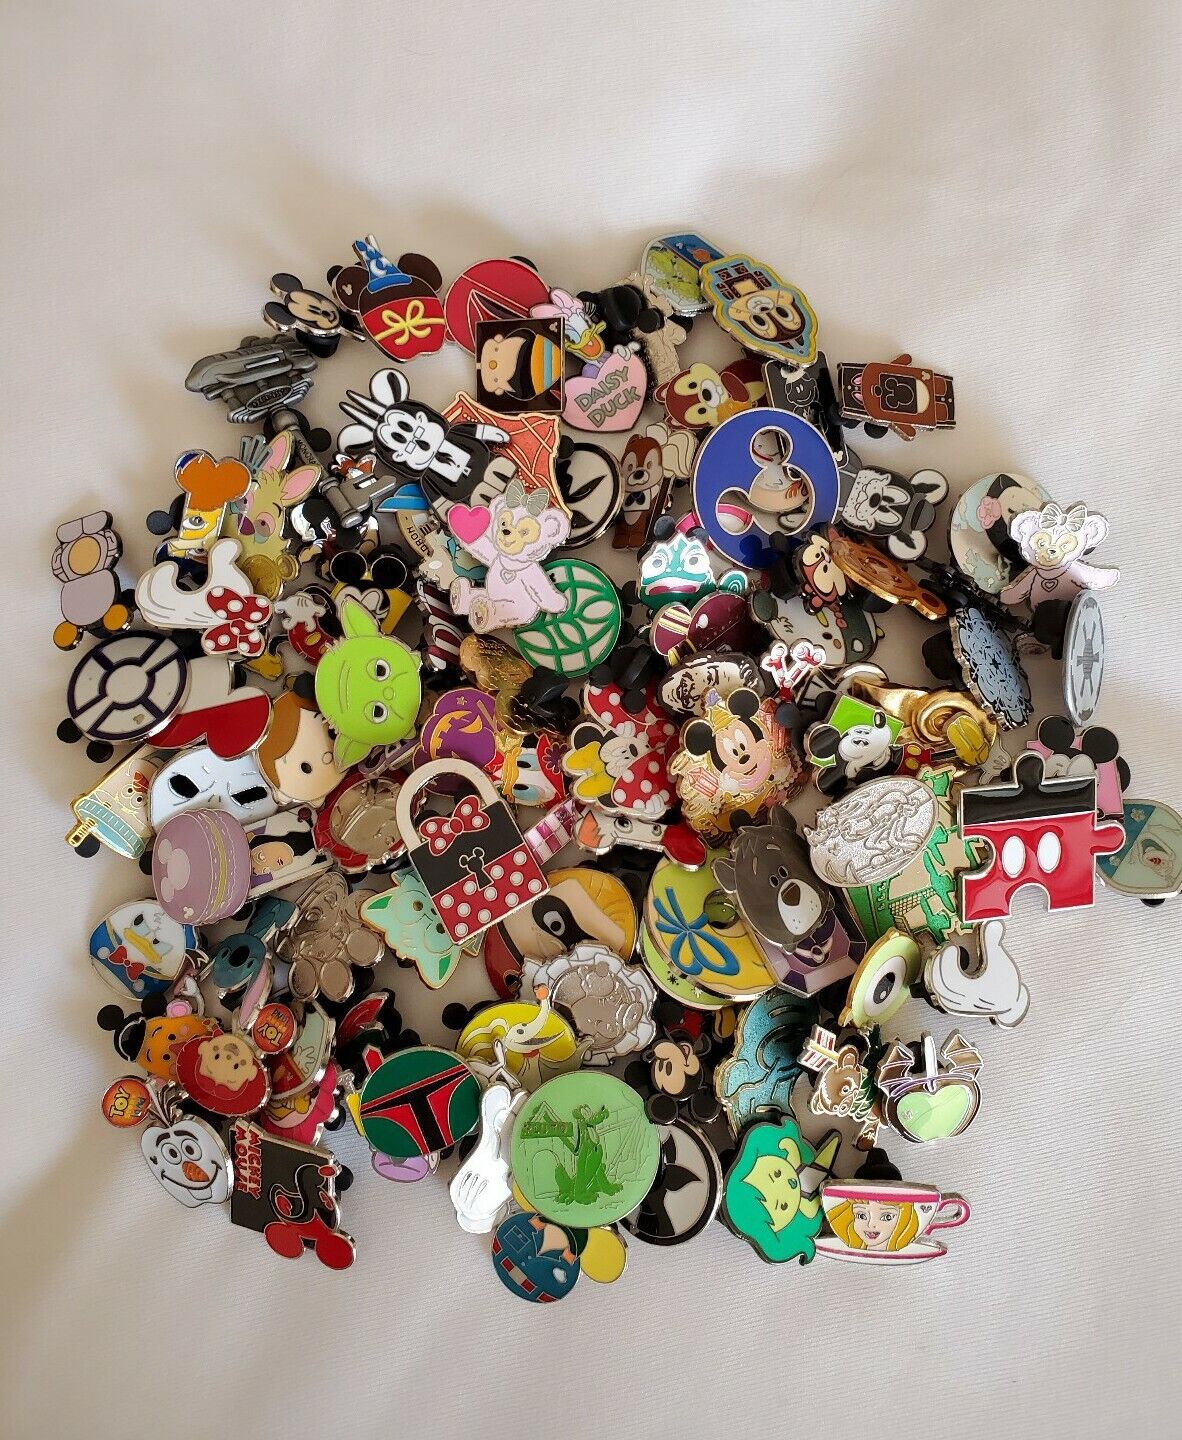 Disney Trading Pin Lot 200 DIFFERENT PINS + Free Lanyard NO DOUBLES Trade 100%